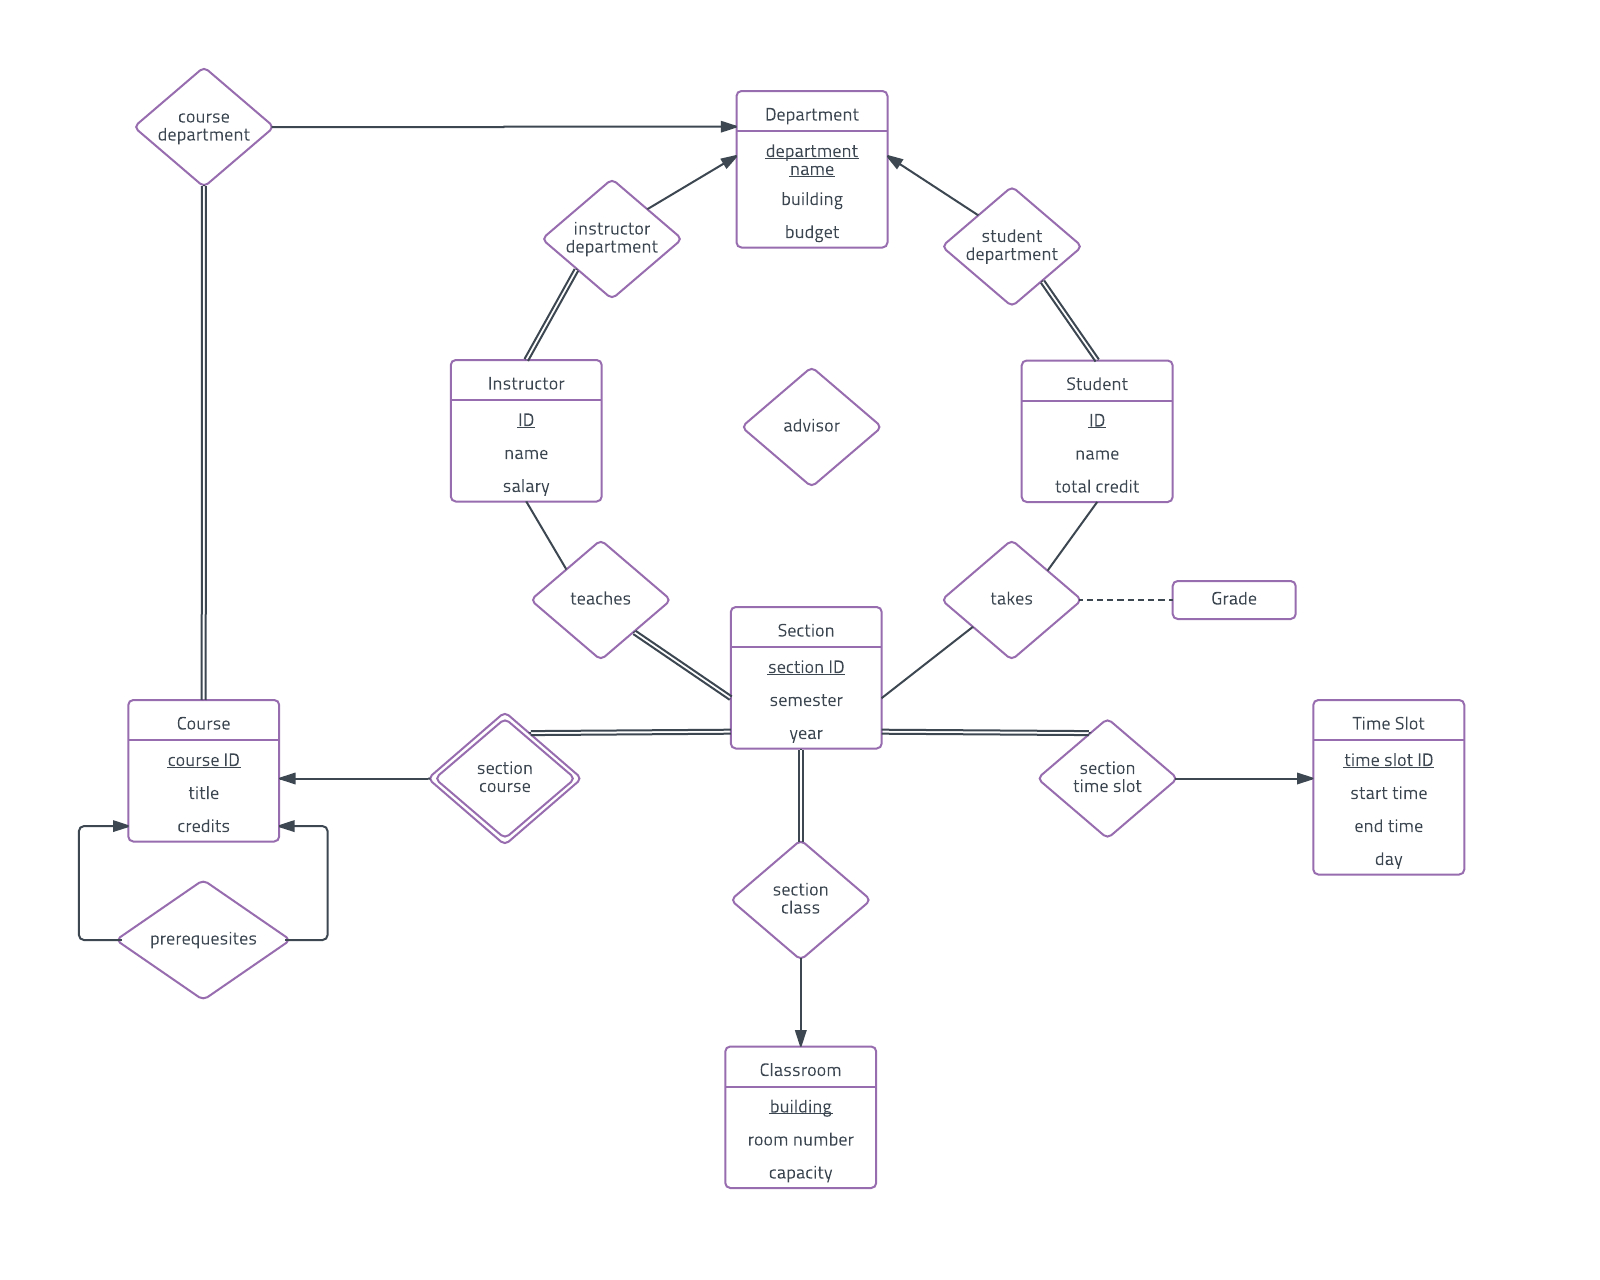 Er Diagram Examples And Templates | Lucidchart within Er Diagram Examples Of Banking System